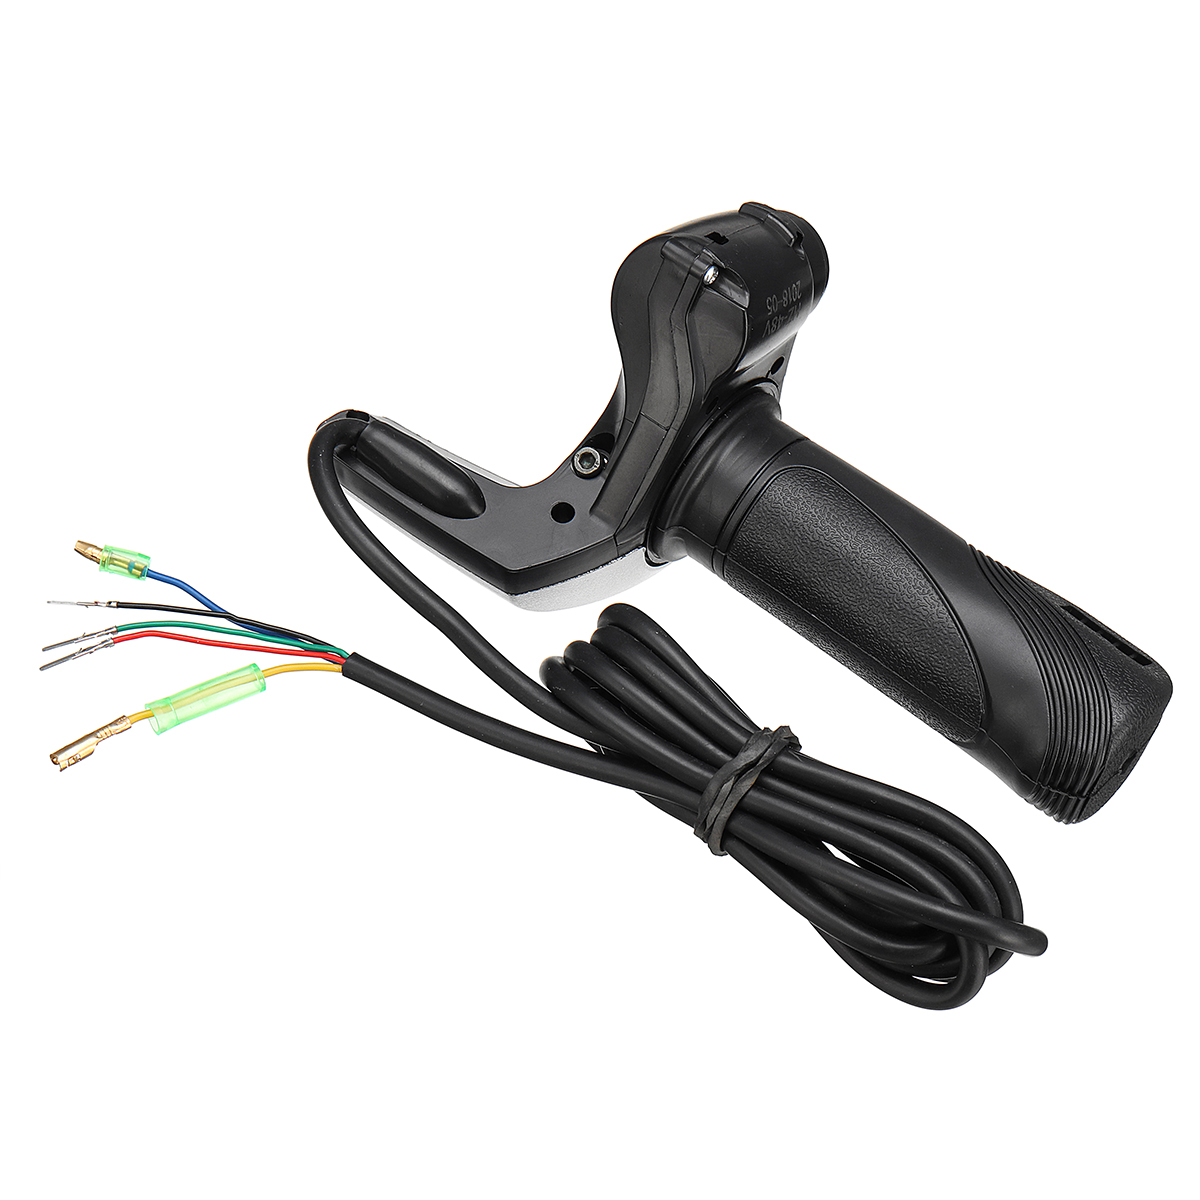 1000W 48V Electric Motor Brushed Controller + Throttle Grip Fits Standard 7/8 Inches(22Mm) Handle Bars - Auto GoShop